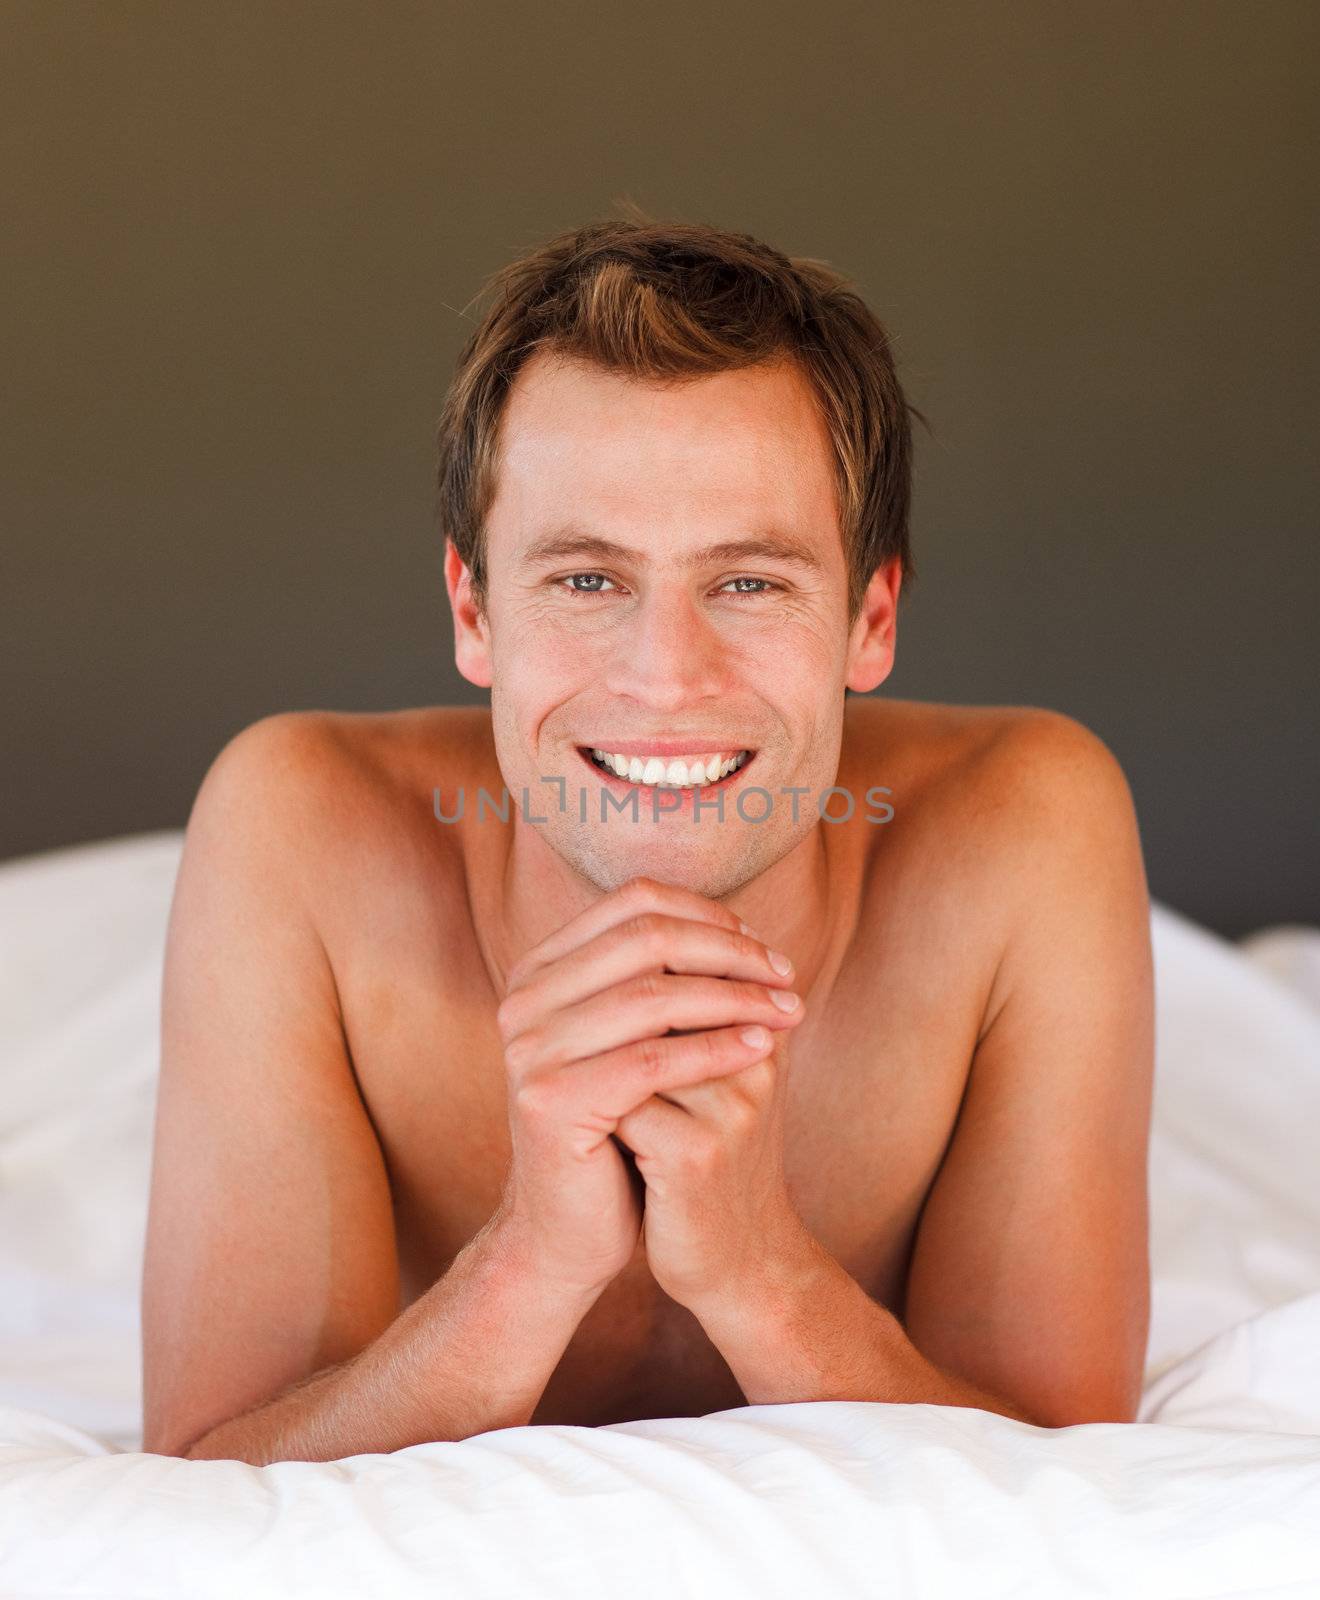 Isolated young man relaxing in bed smiling at the camera